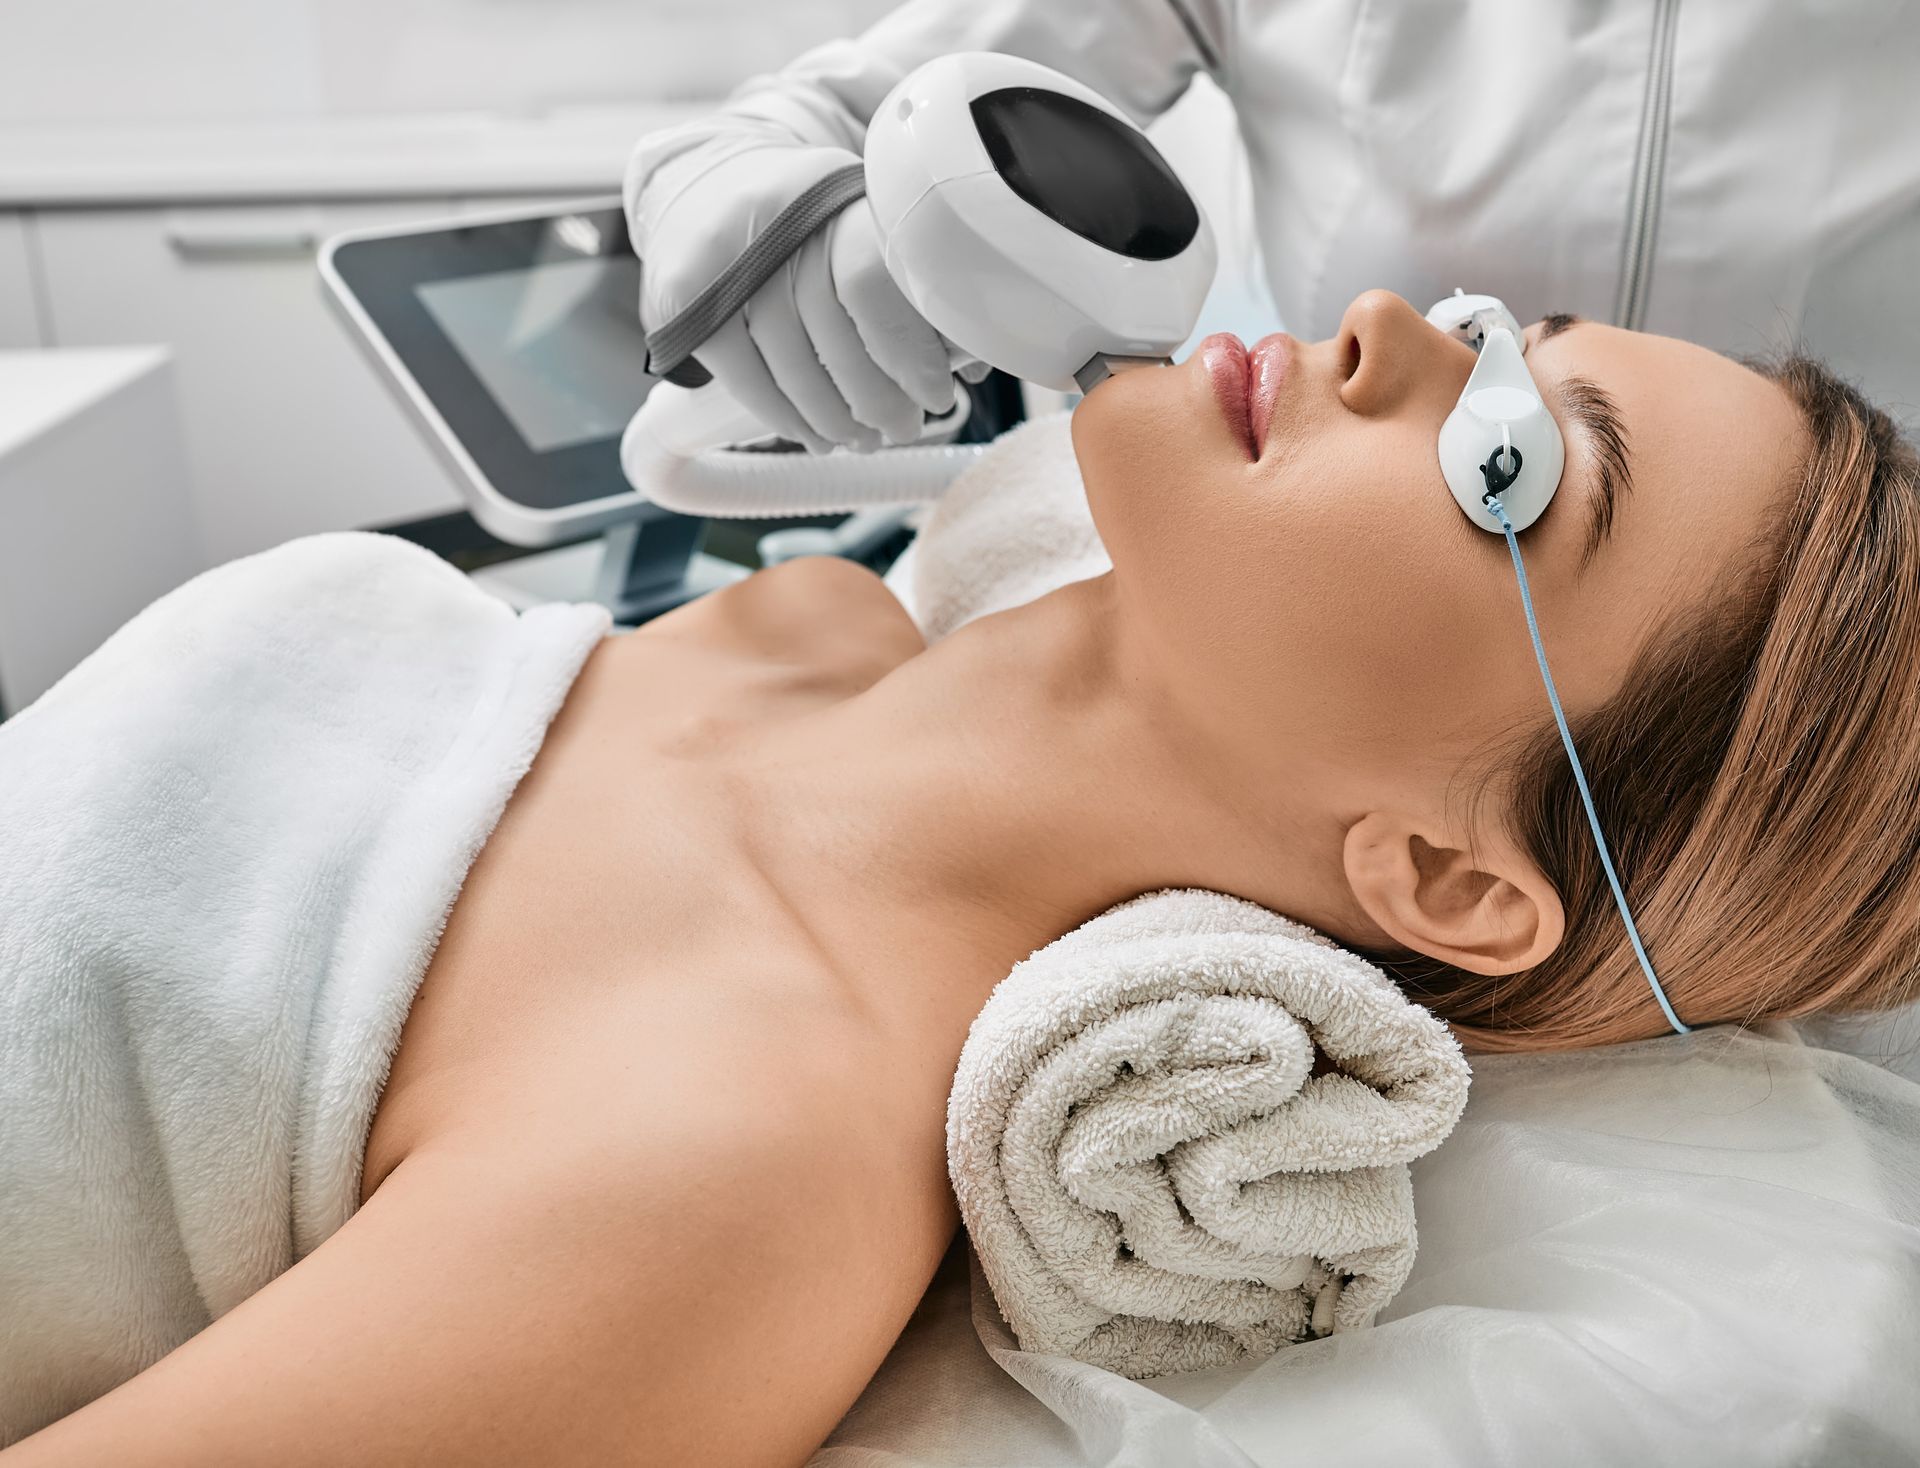 a woman is getting a laser treatment on her face